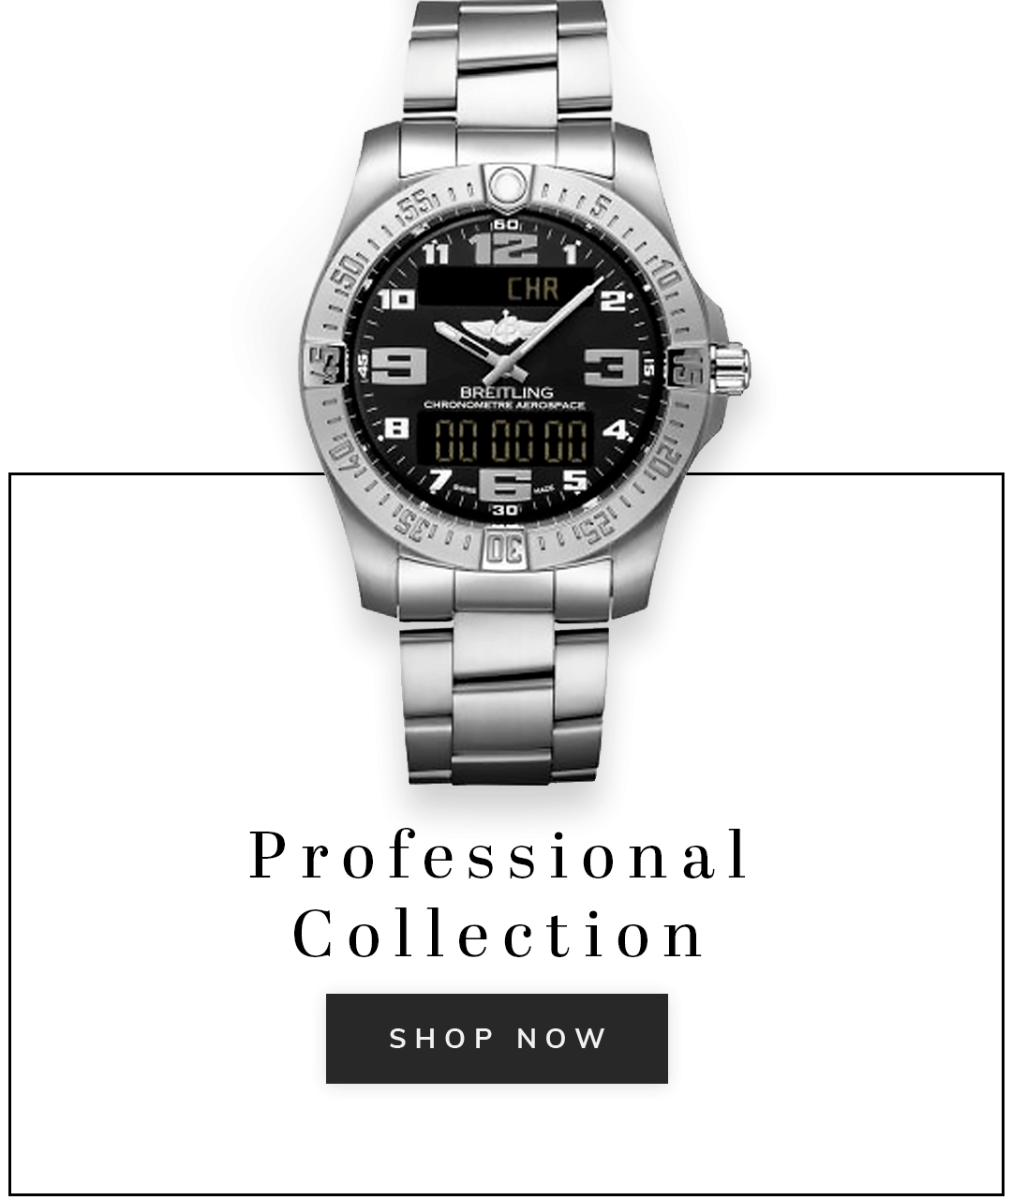 A Breitling Aerospace Evo watch with text professional collection shop now